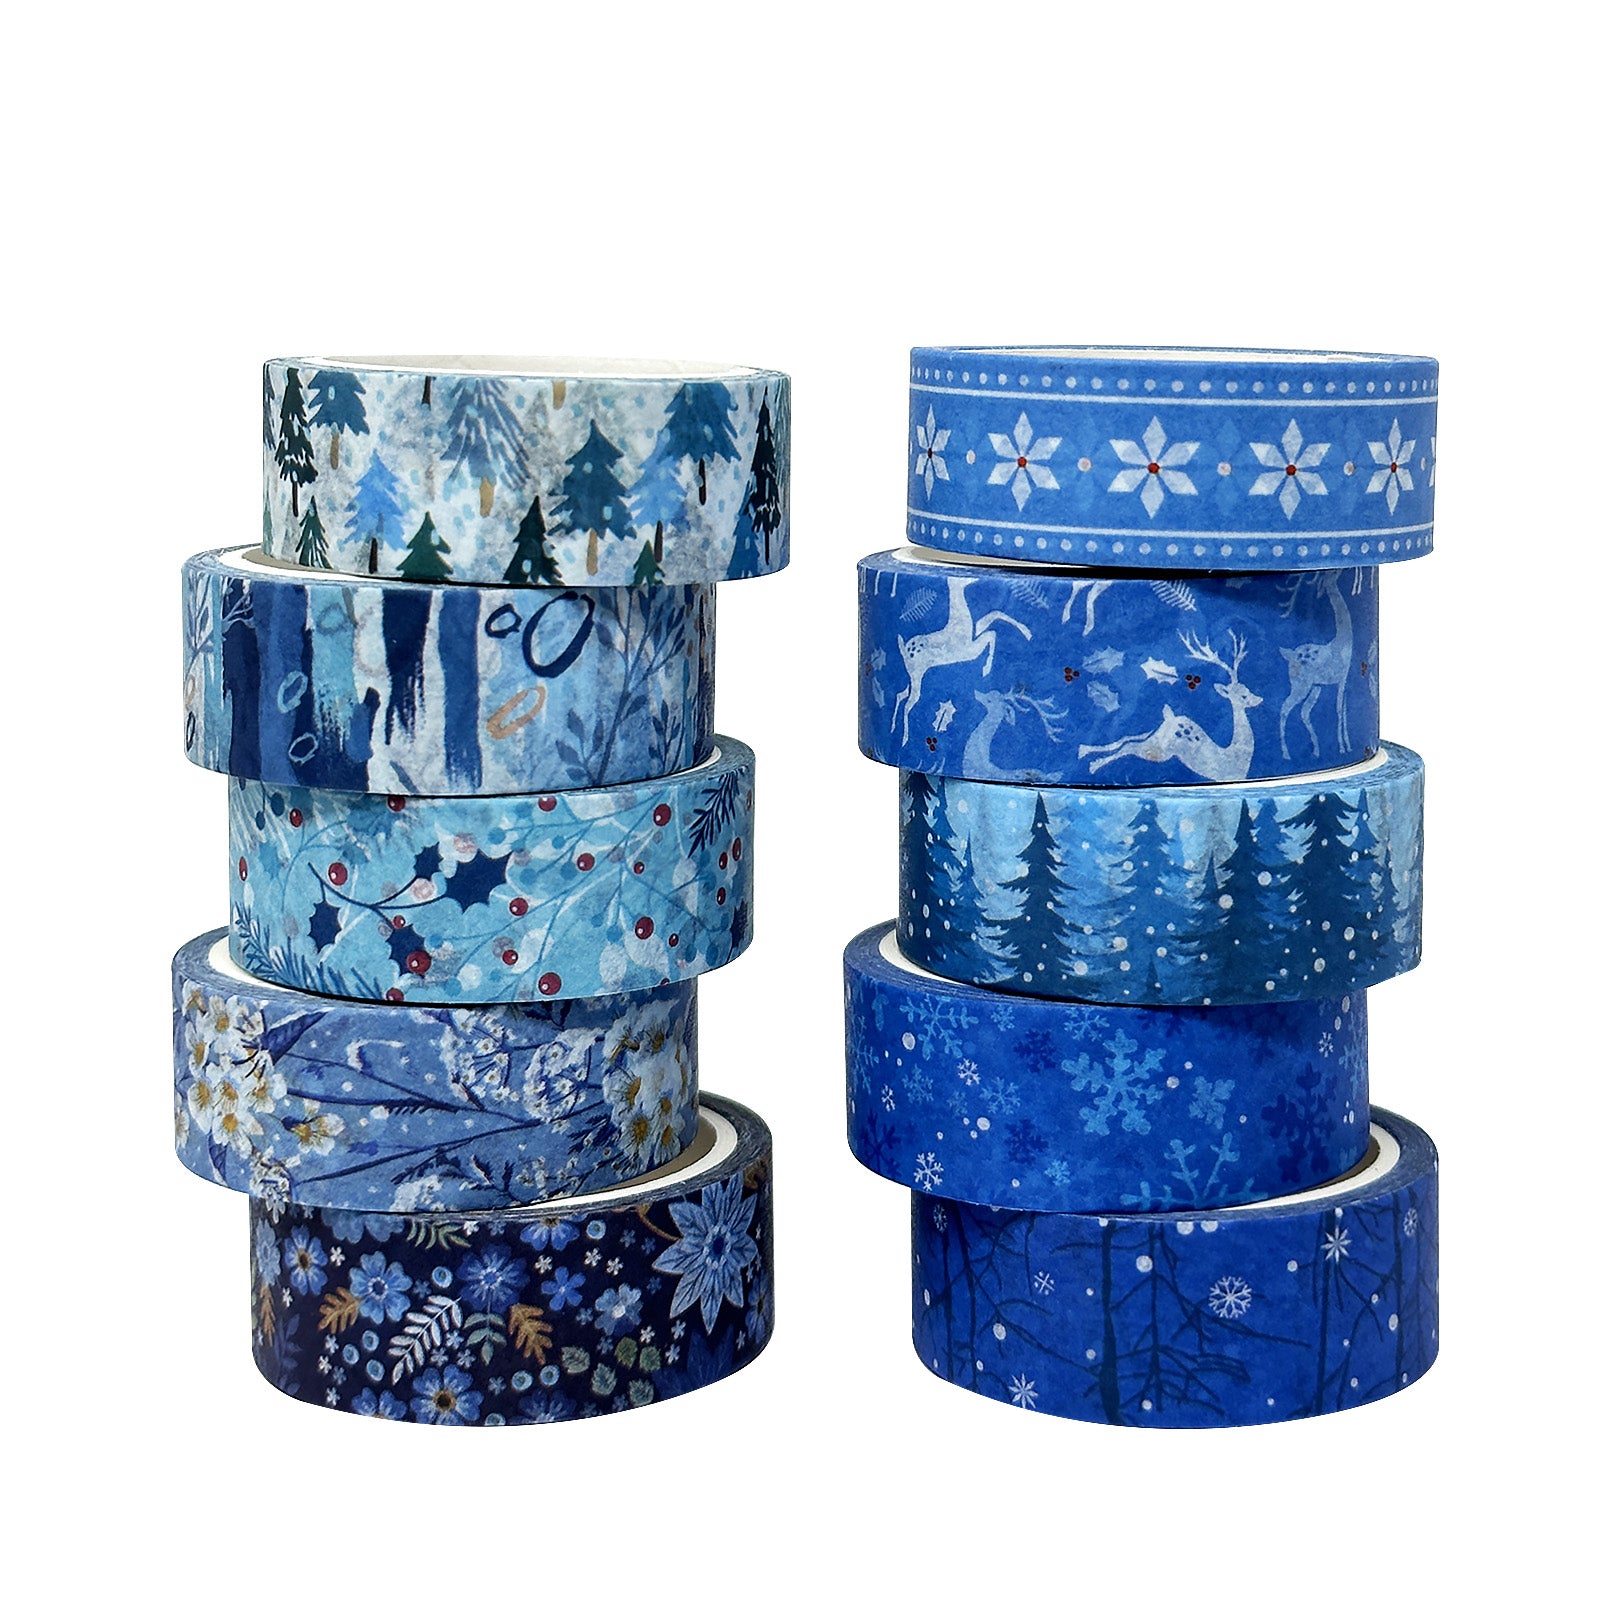 Snowy Pine Trees Christmas Washi Tape Festive Eco Friendly Paper Tape for  Gift Wrapping, Crafts Decorating Packaging Journals & Scrapbooks 